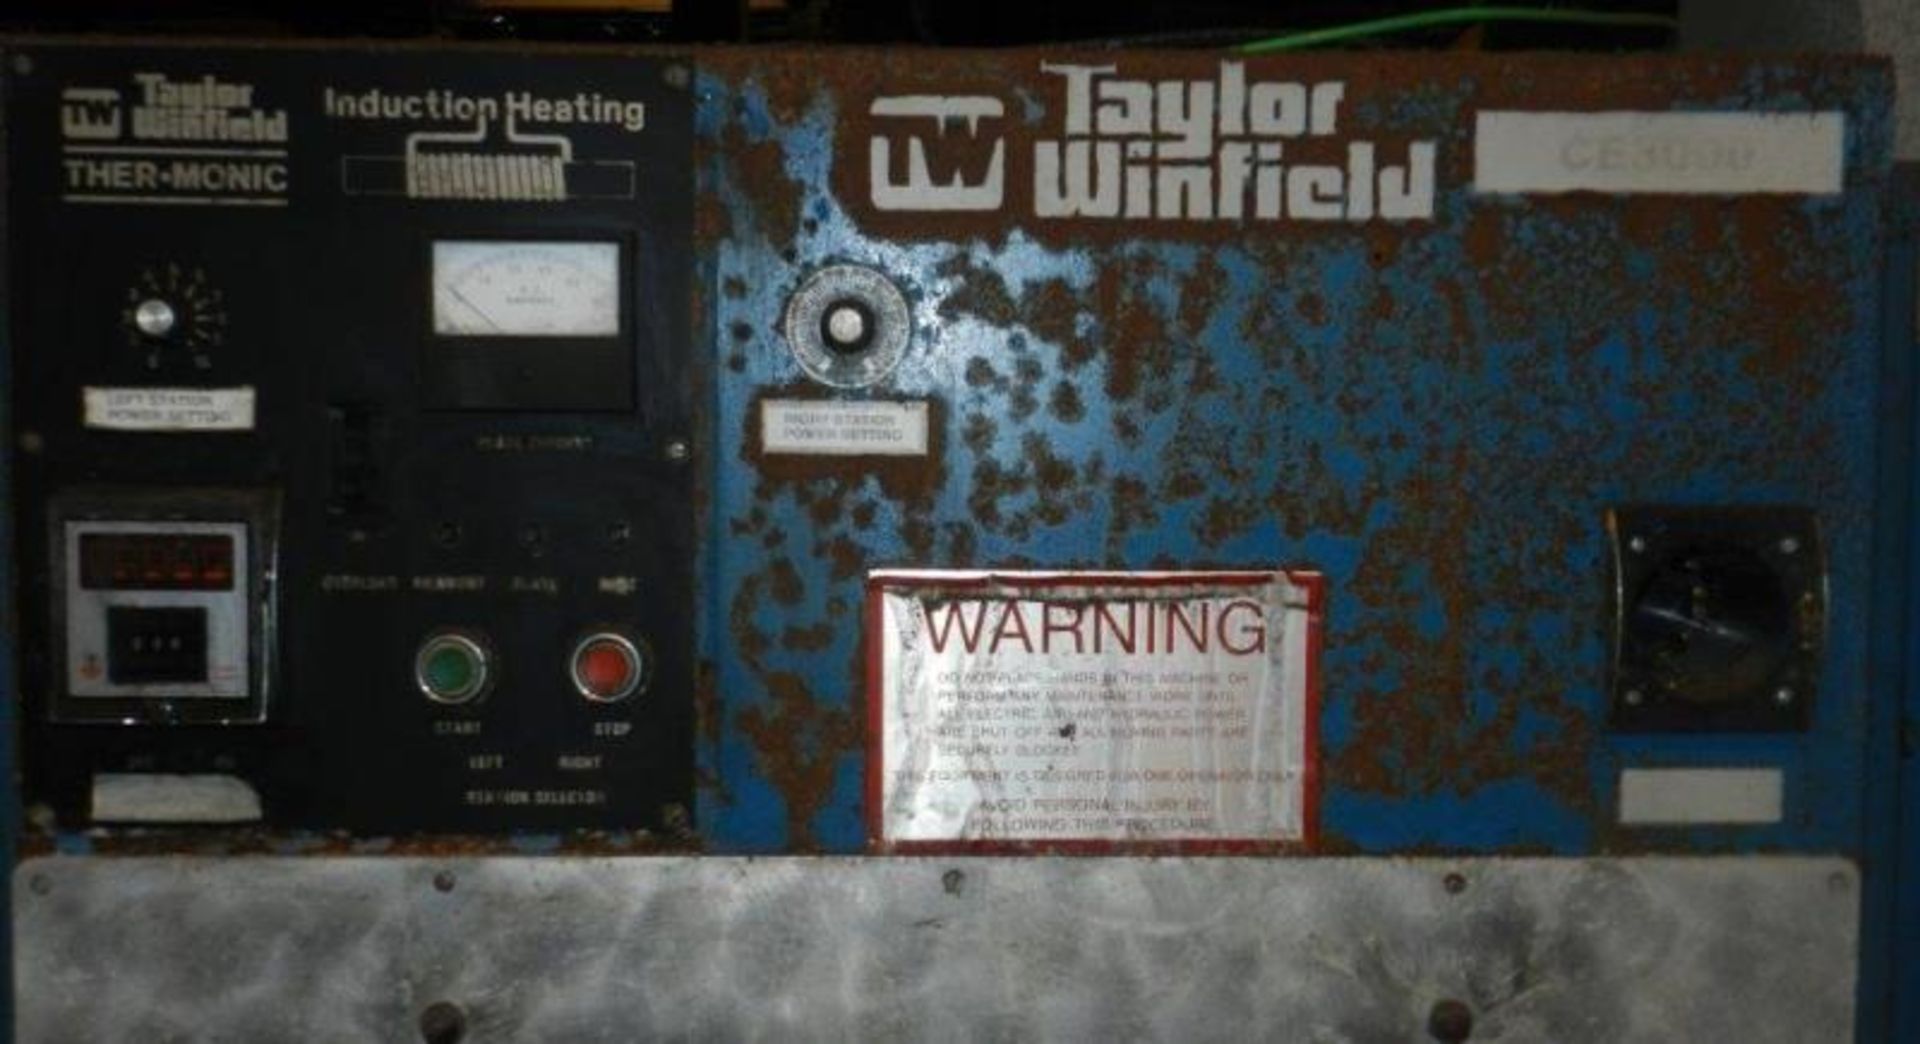 Taylor Winfield Ce-3000 30 Kw Dual Station Induction Hardener - Image 11 of 12